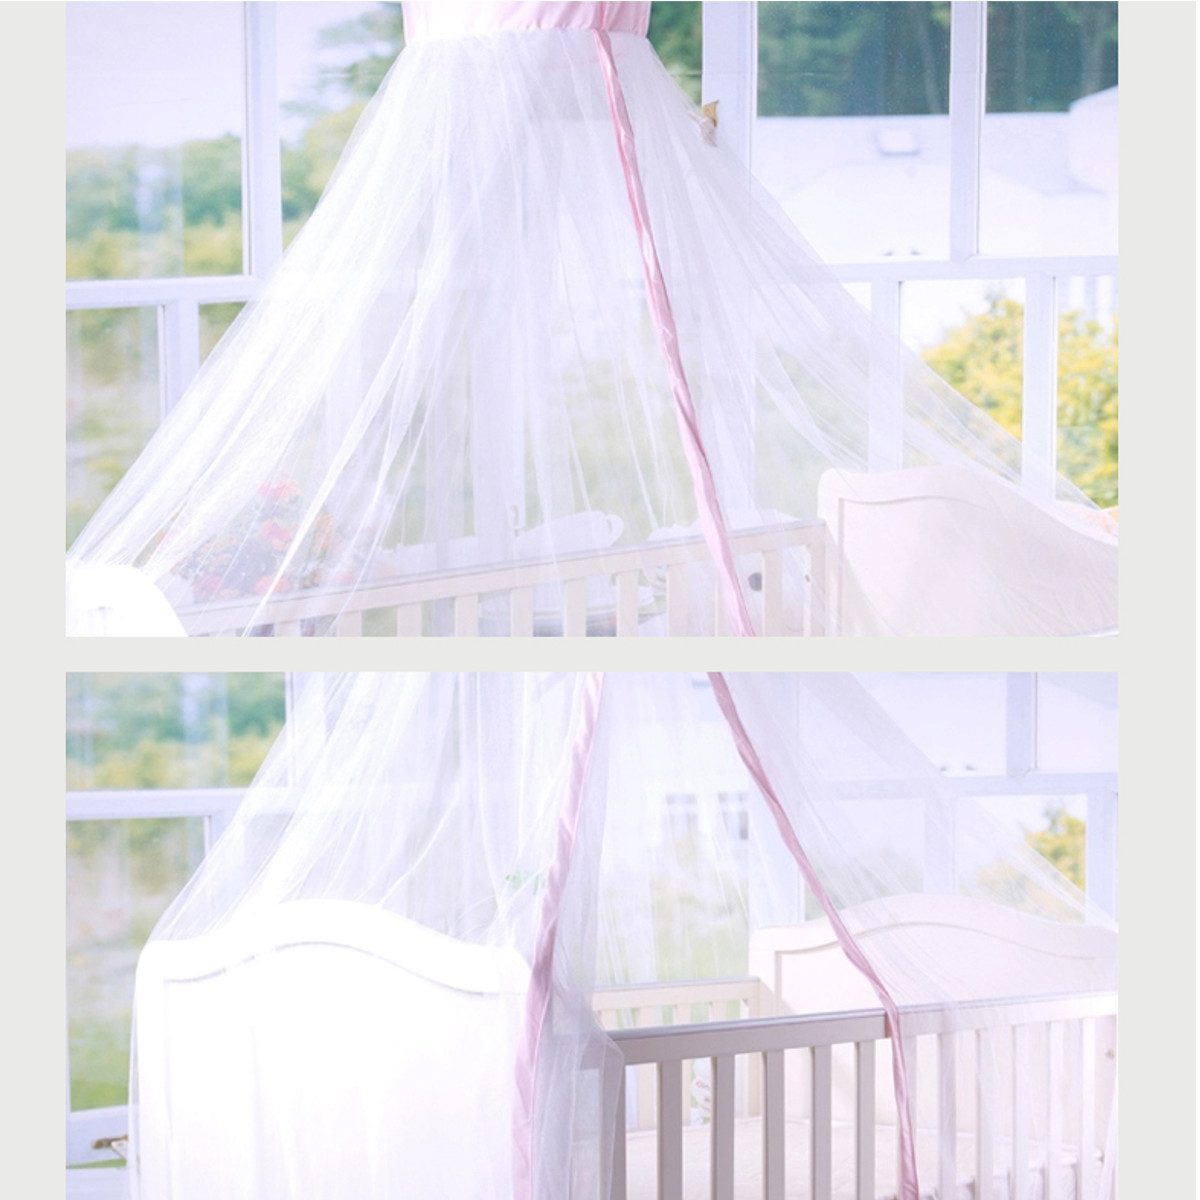 Mosquito Net Children Bed Curtain Dome Cot Netting Drape Stand Insect Protection